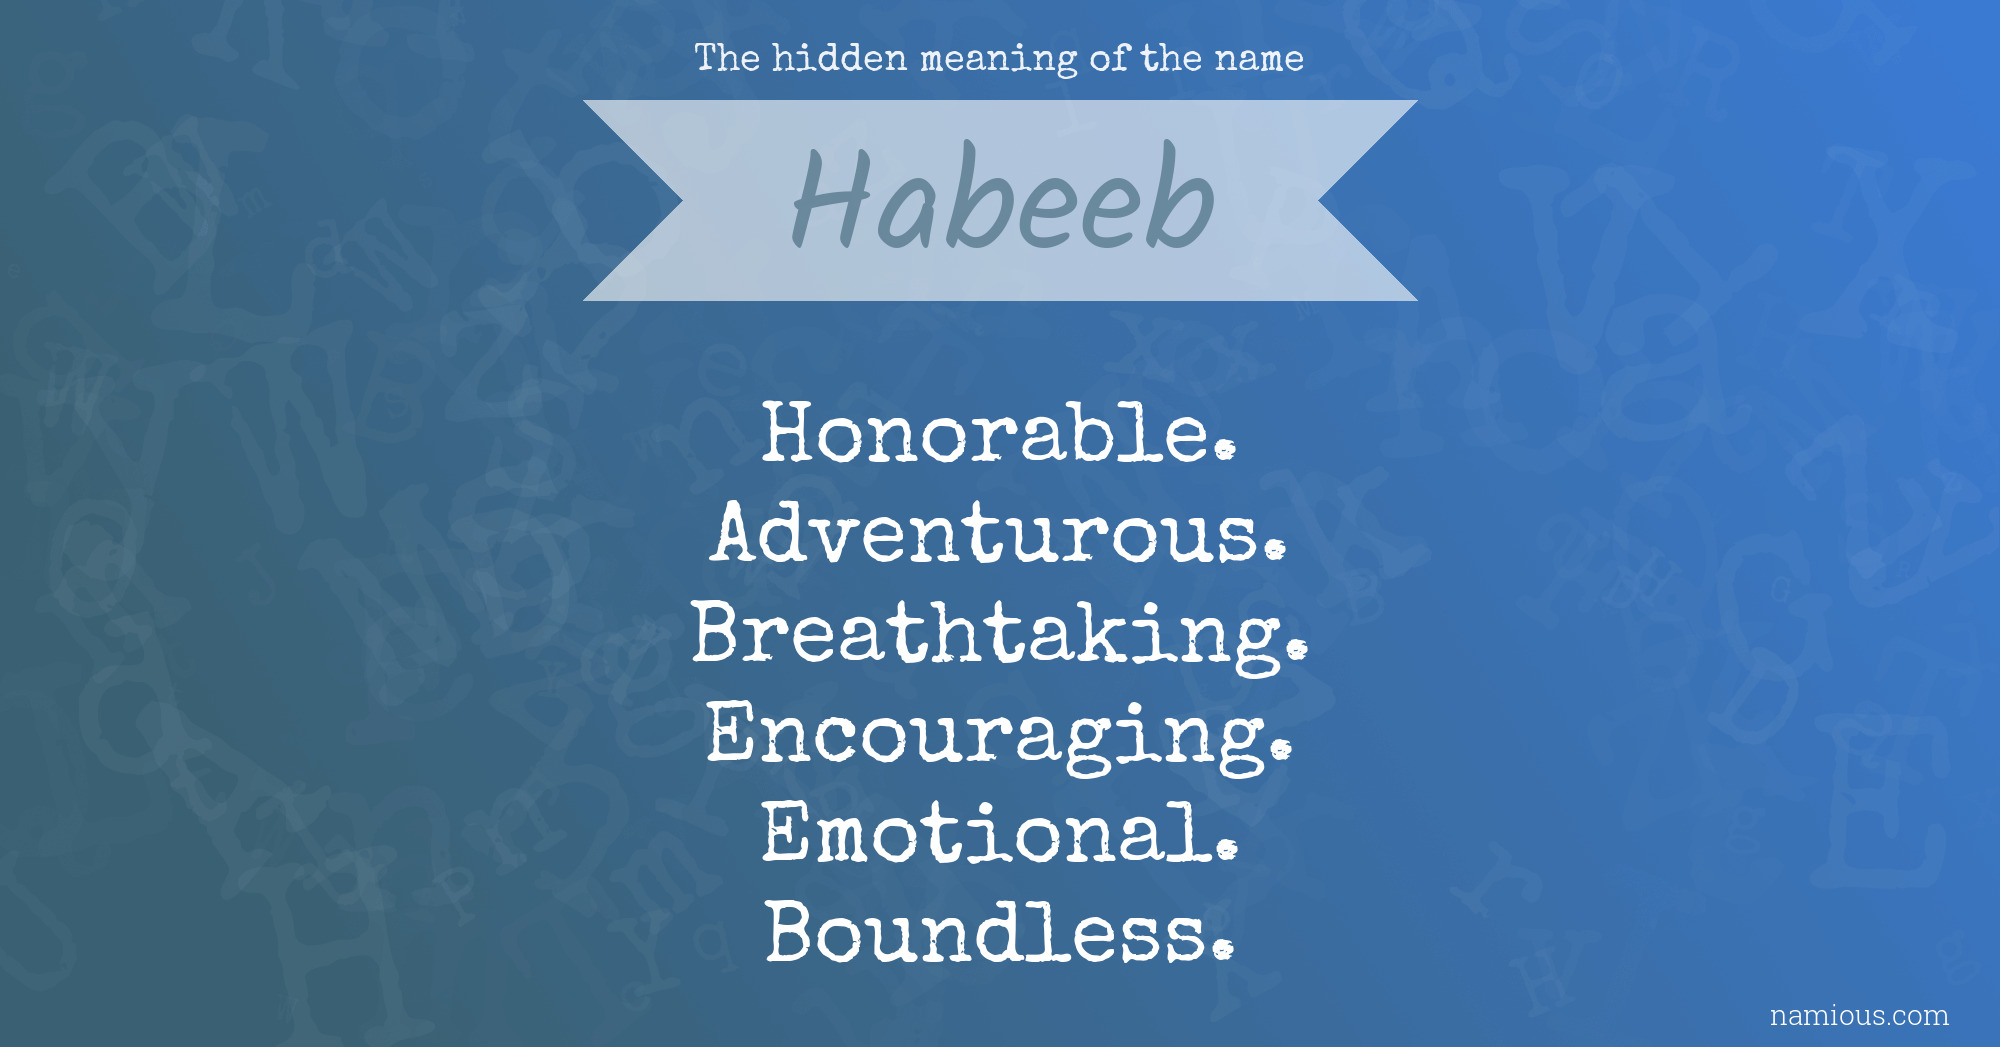 The hidden meaning of the name Habeeb